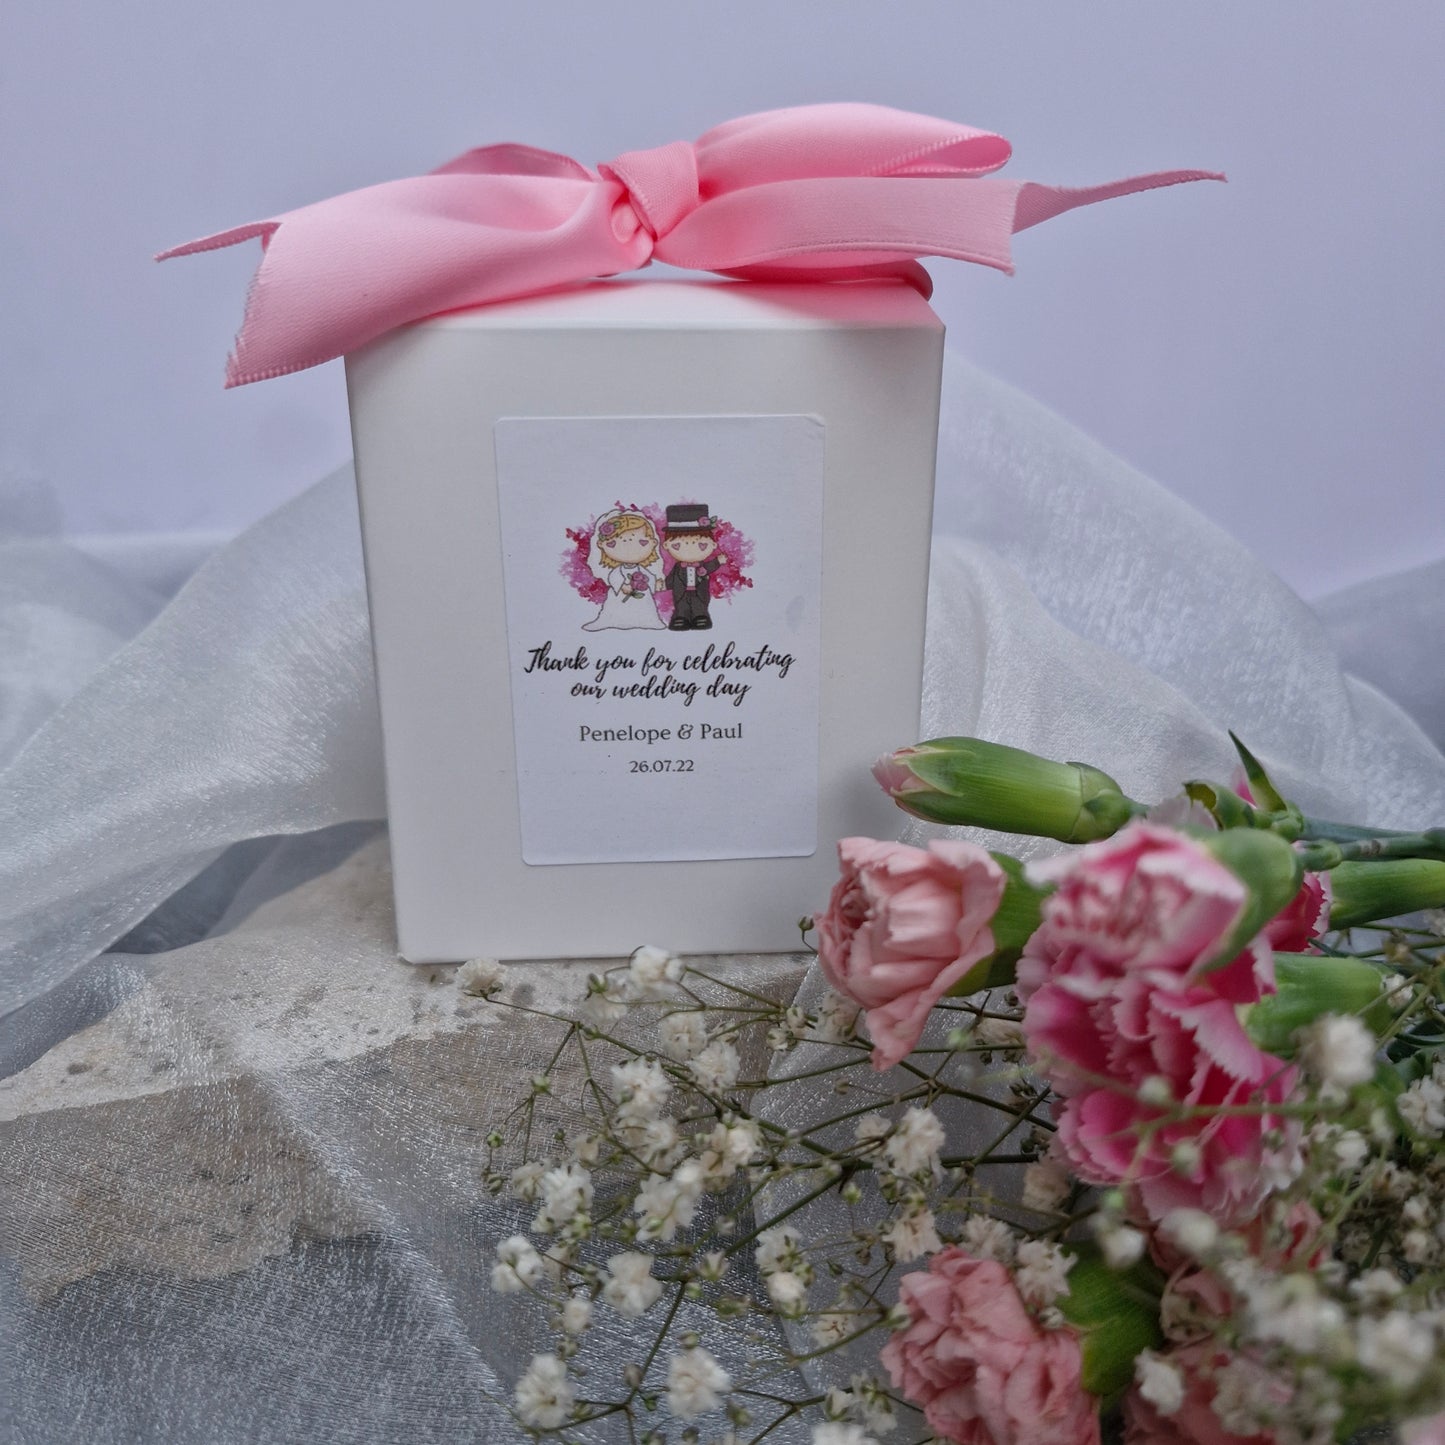 Wedding Favours Boxed Glass Candle